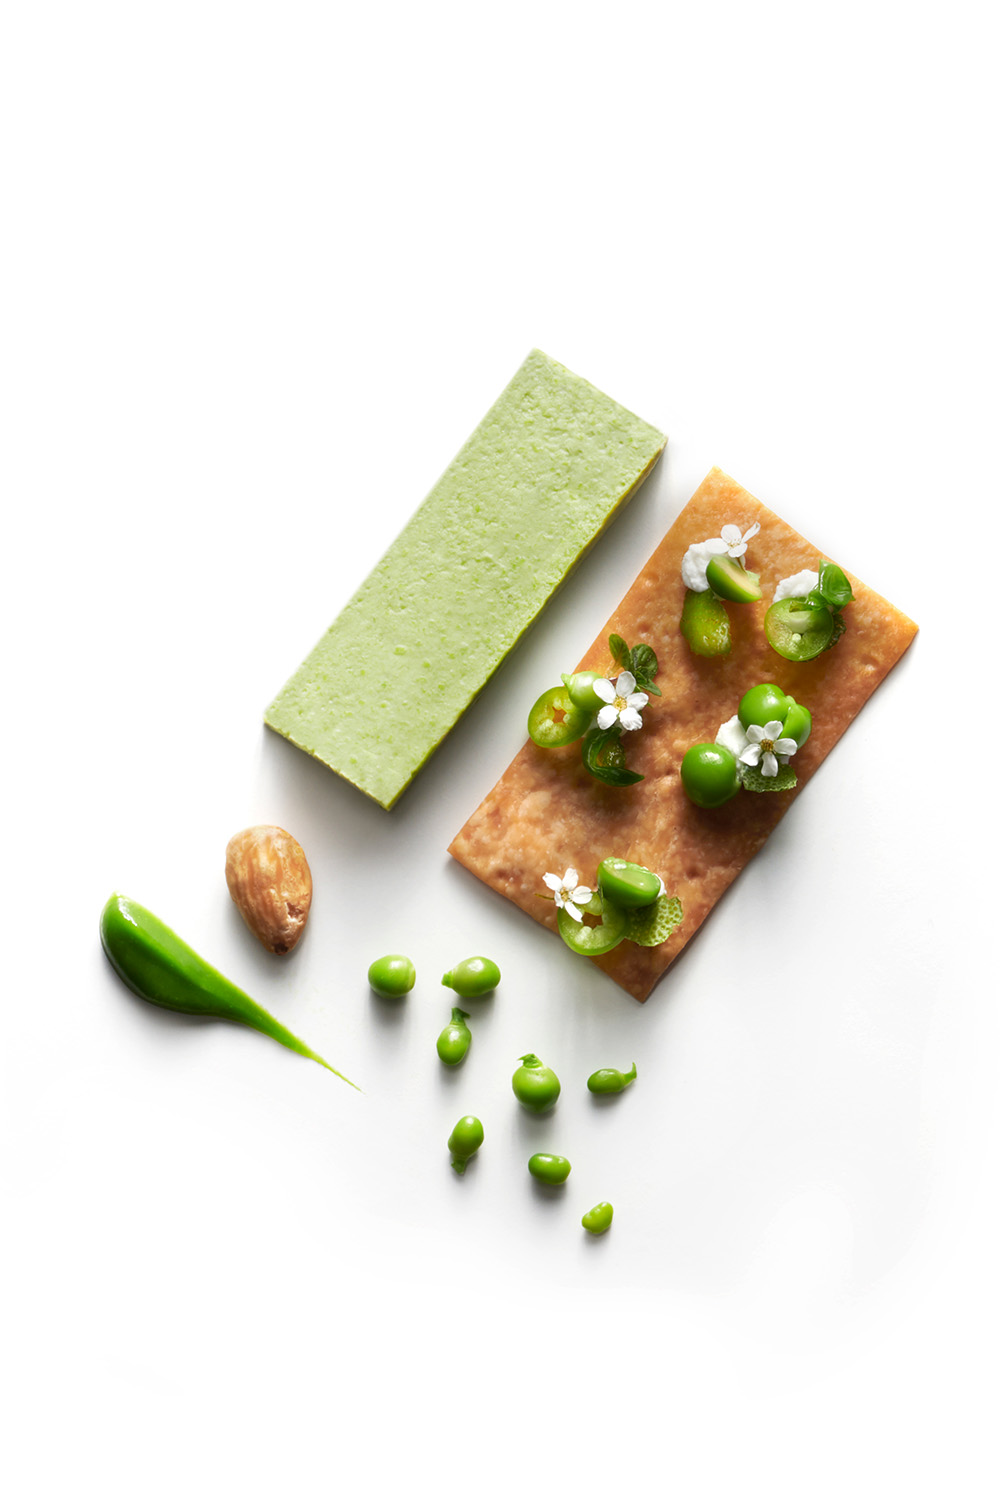 peas pudding and almonds on white background by chef marcello passoni cucina nomade